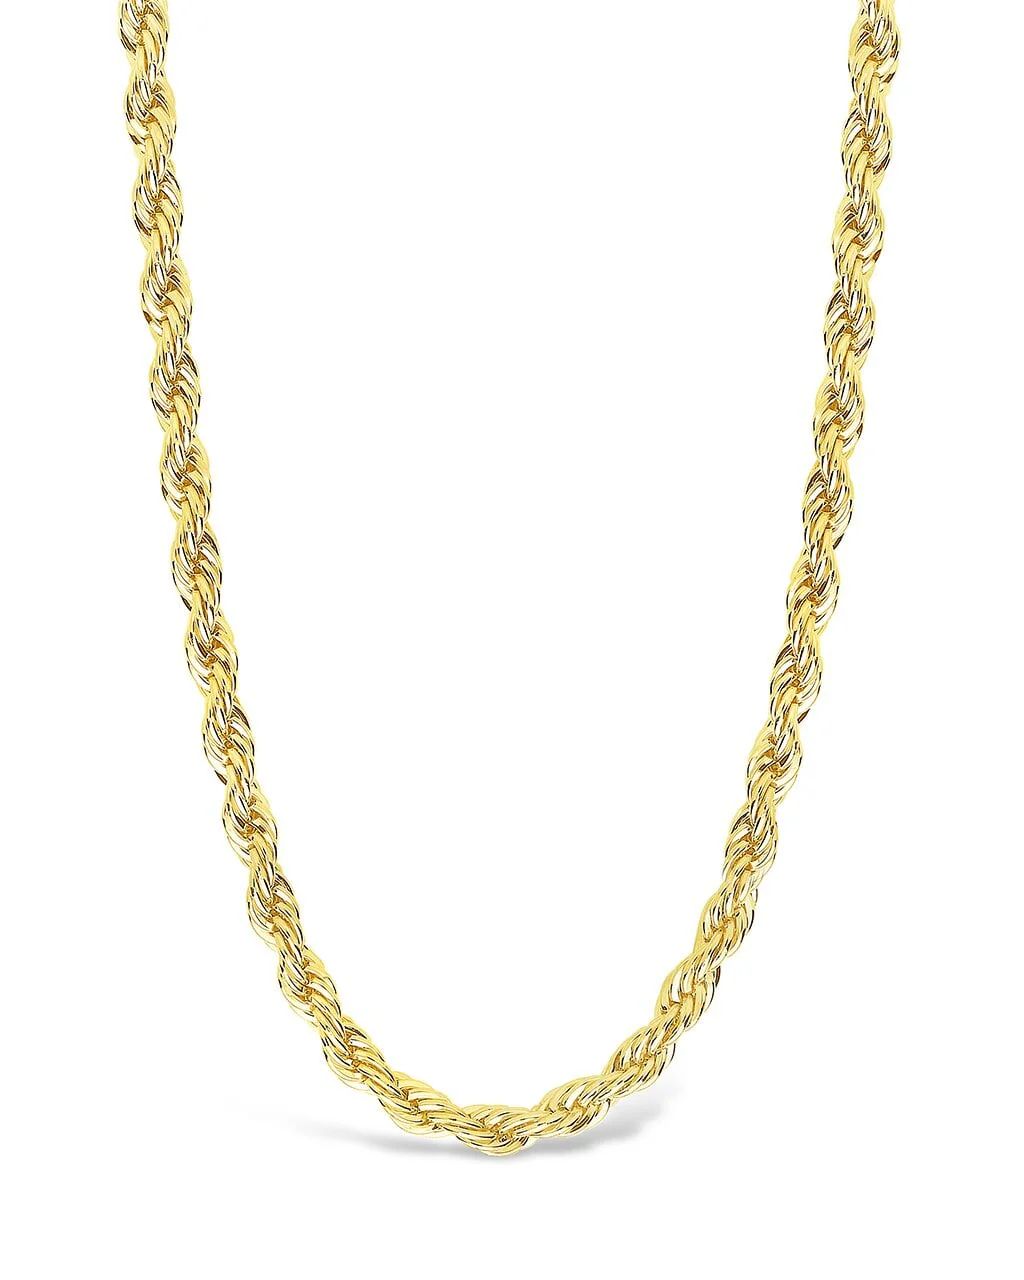 Men's Jewelry | Rope Twist Chain Necklace | Sterling Forever